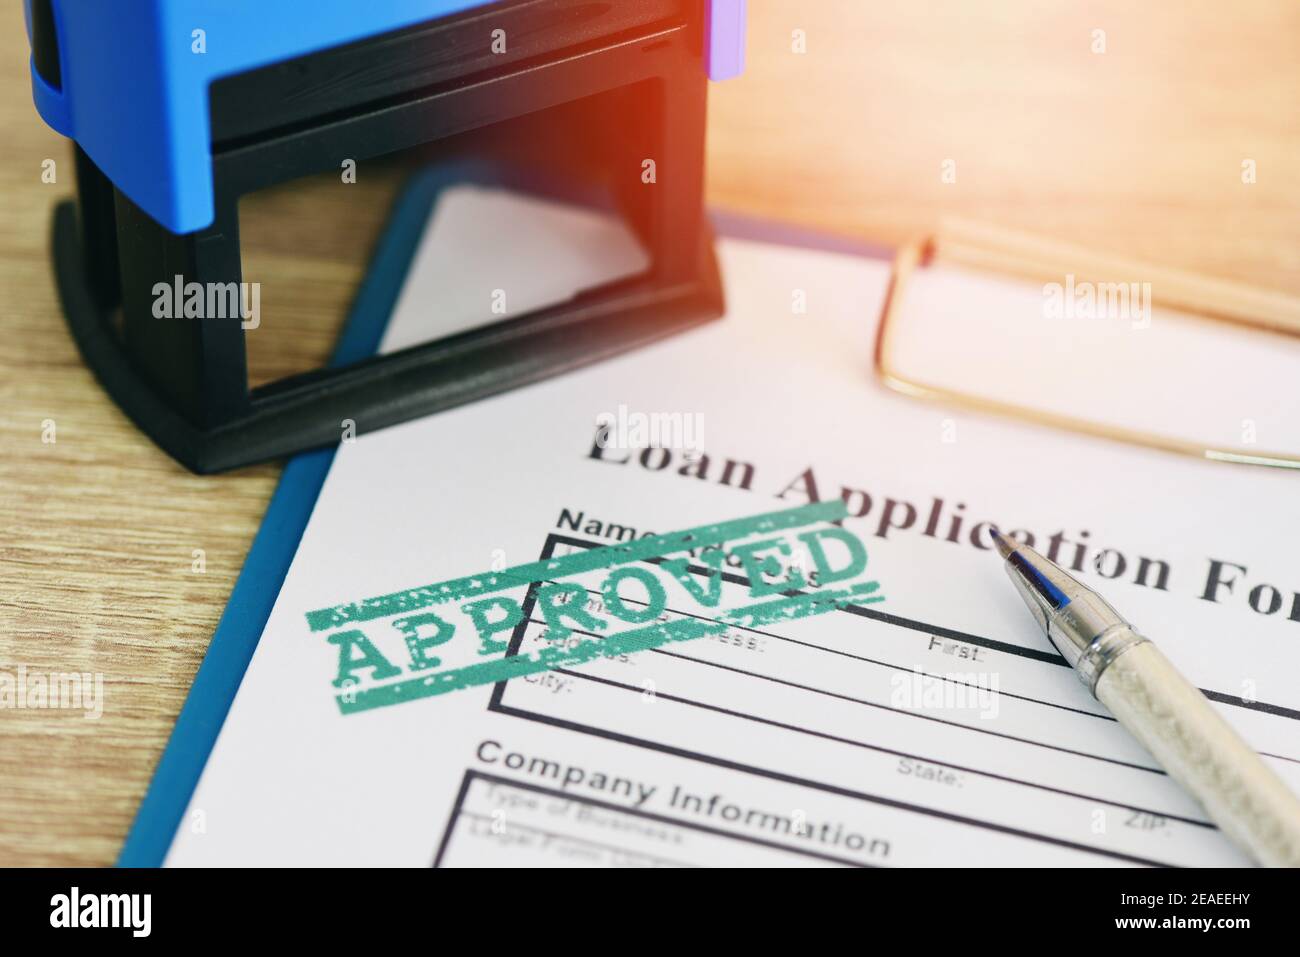 Loan approval, Loan application form with Rubber stamping that says Loan Approved, Financial loan money contract agreement company credit or person Stock Photo